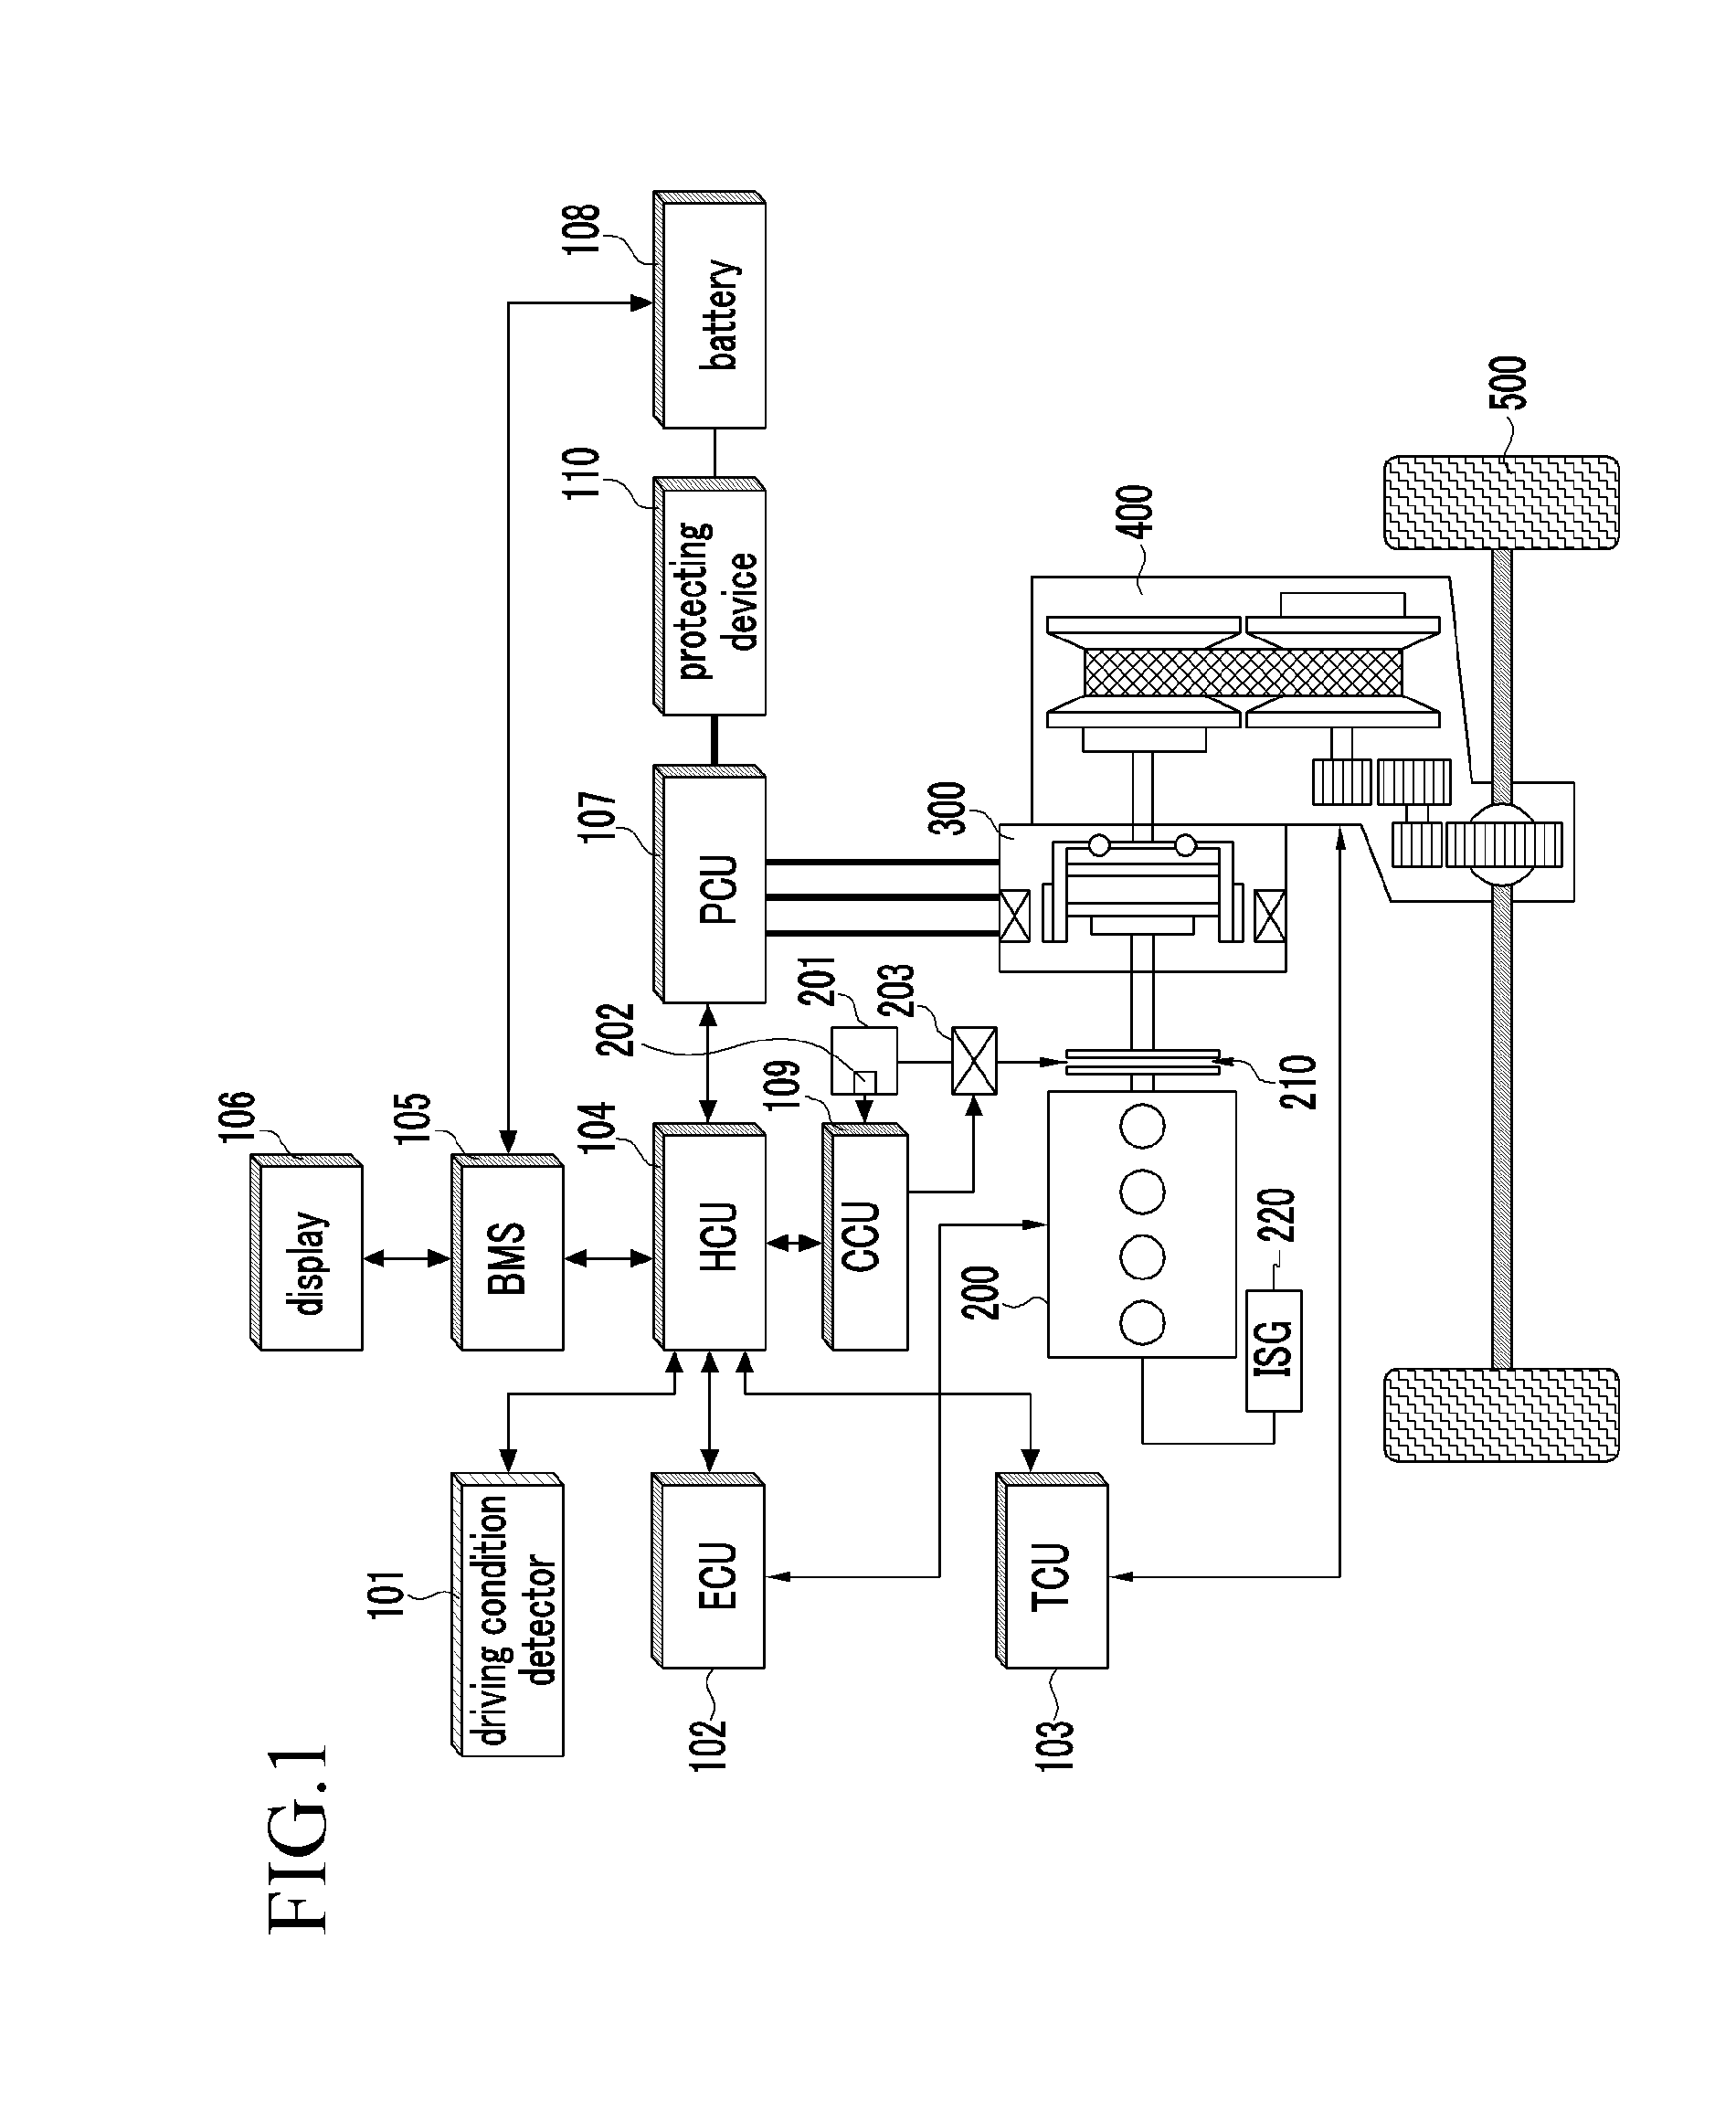 System for controlling engine starting of hybrid vehicle and method thereof